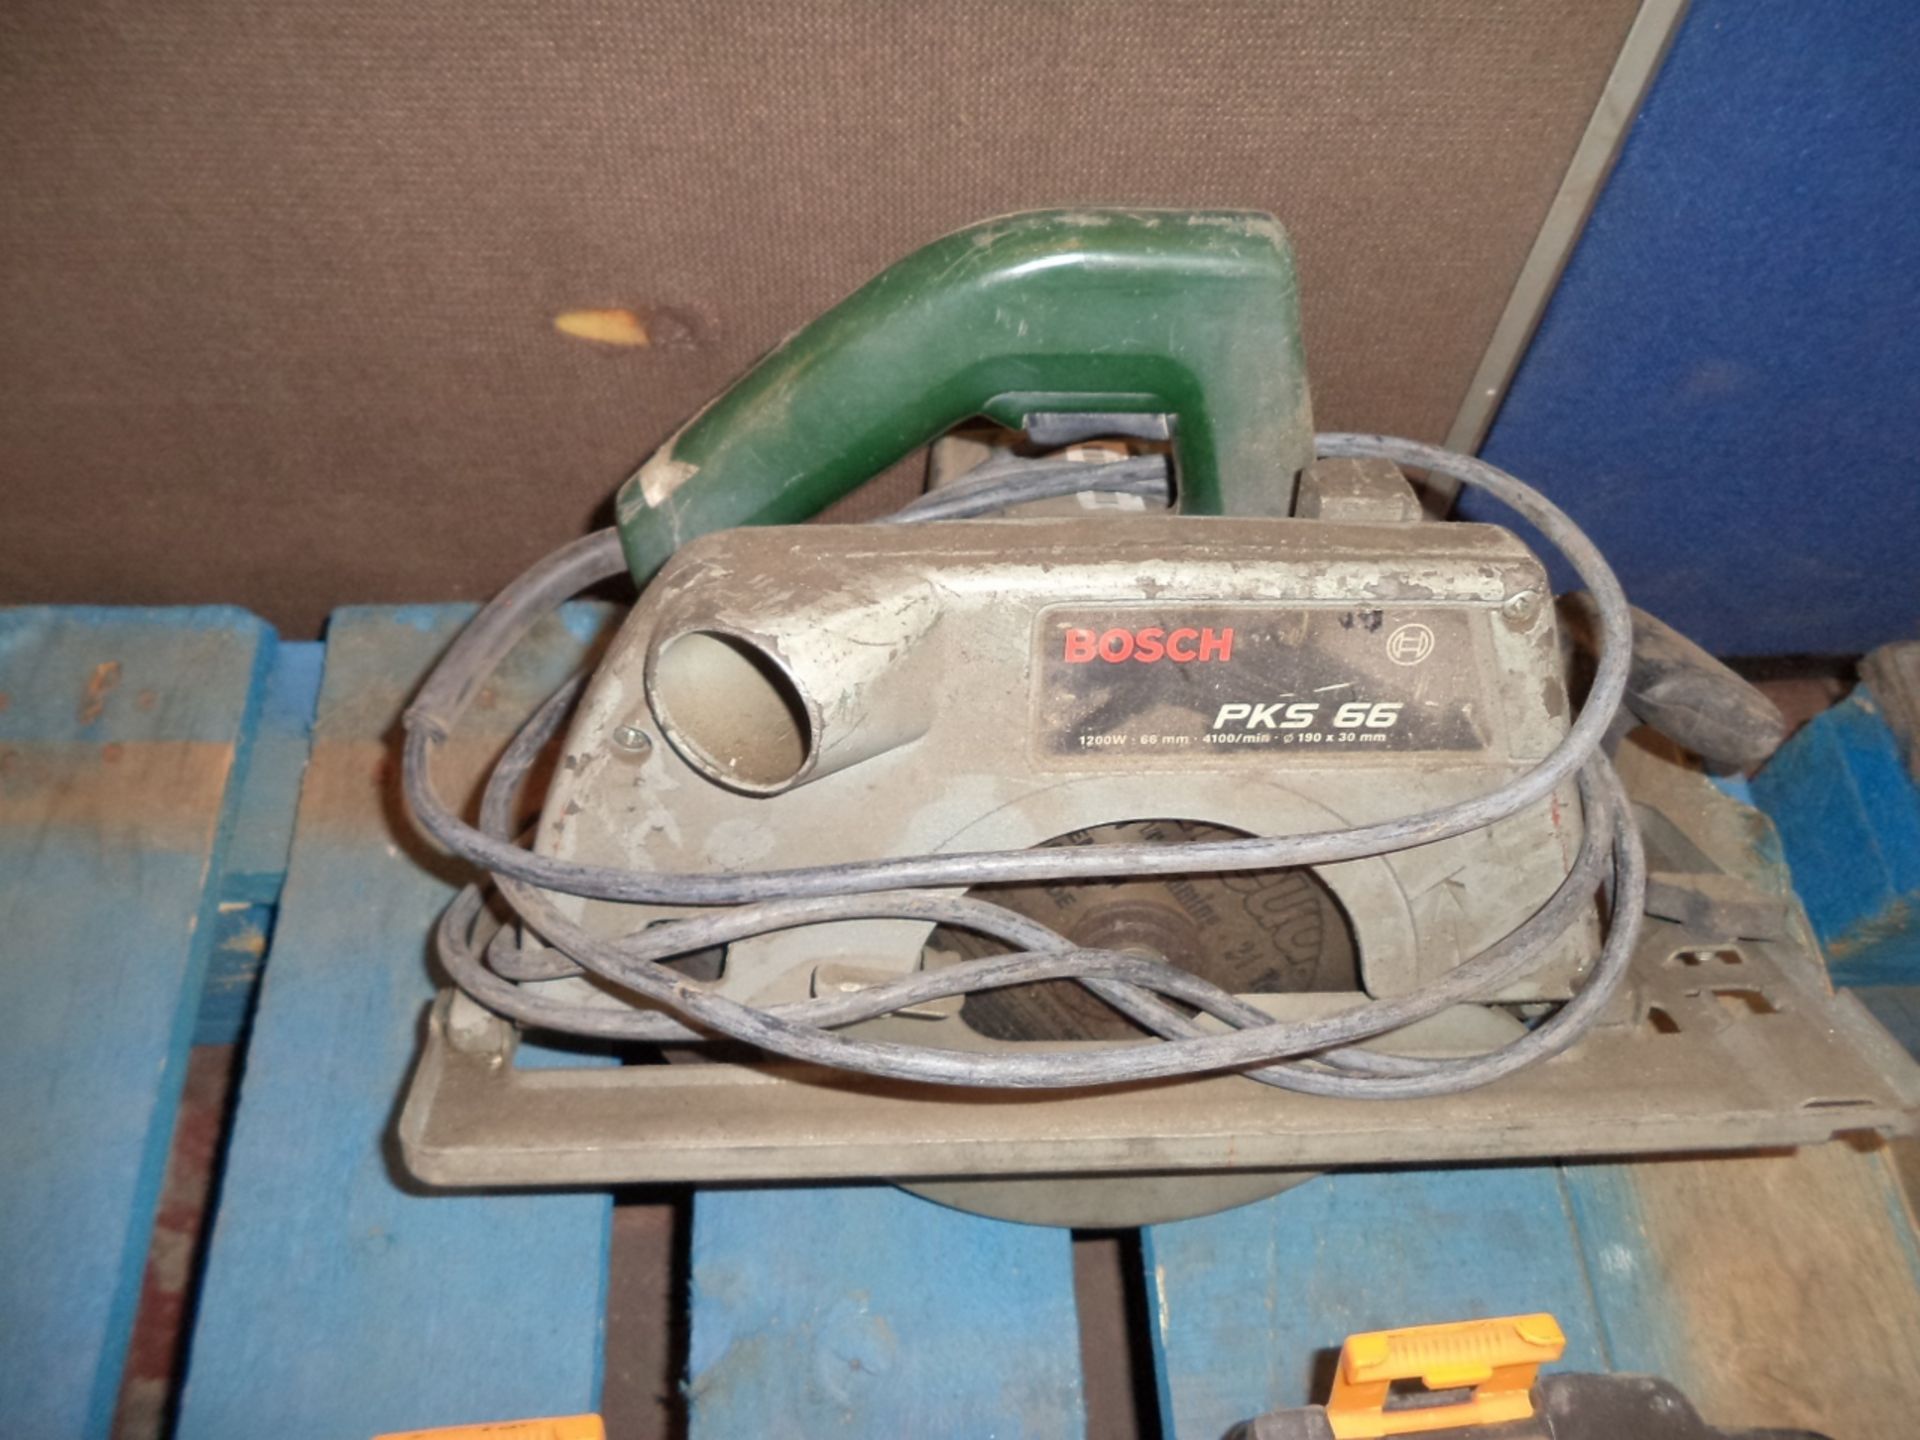 Pair of power tools: electric jig saw in case plus Bosch model PKS66 electric circular saw - Image 3 of 4